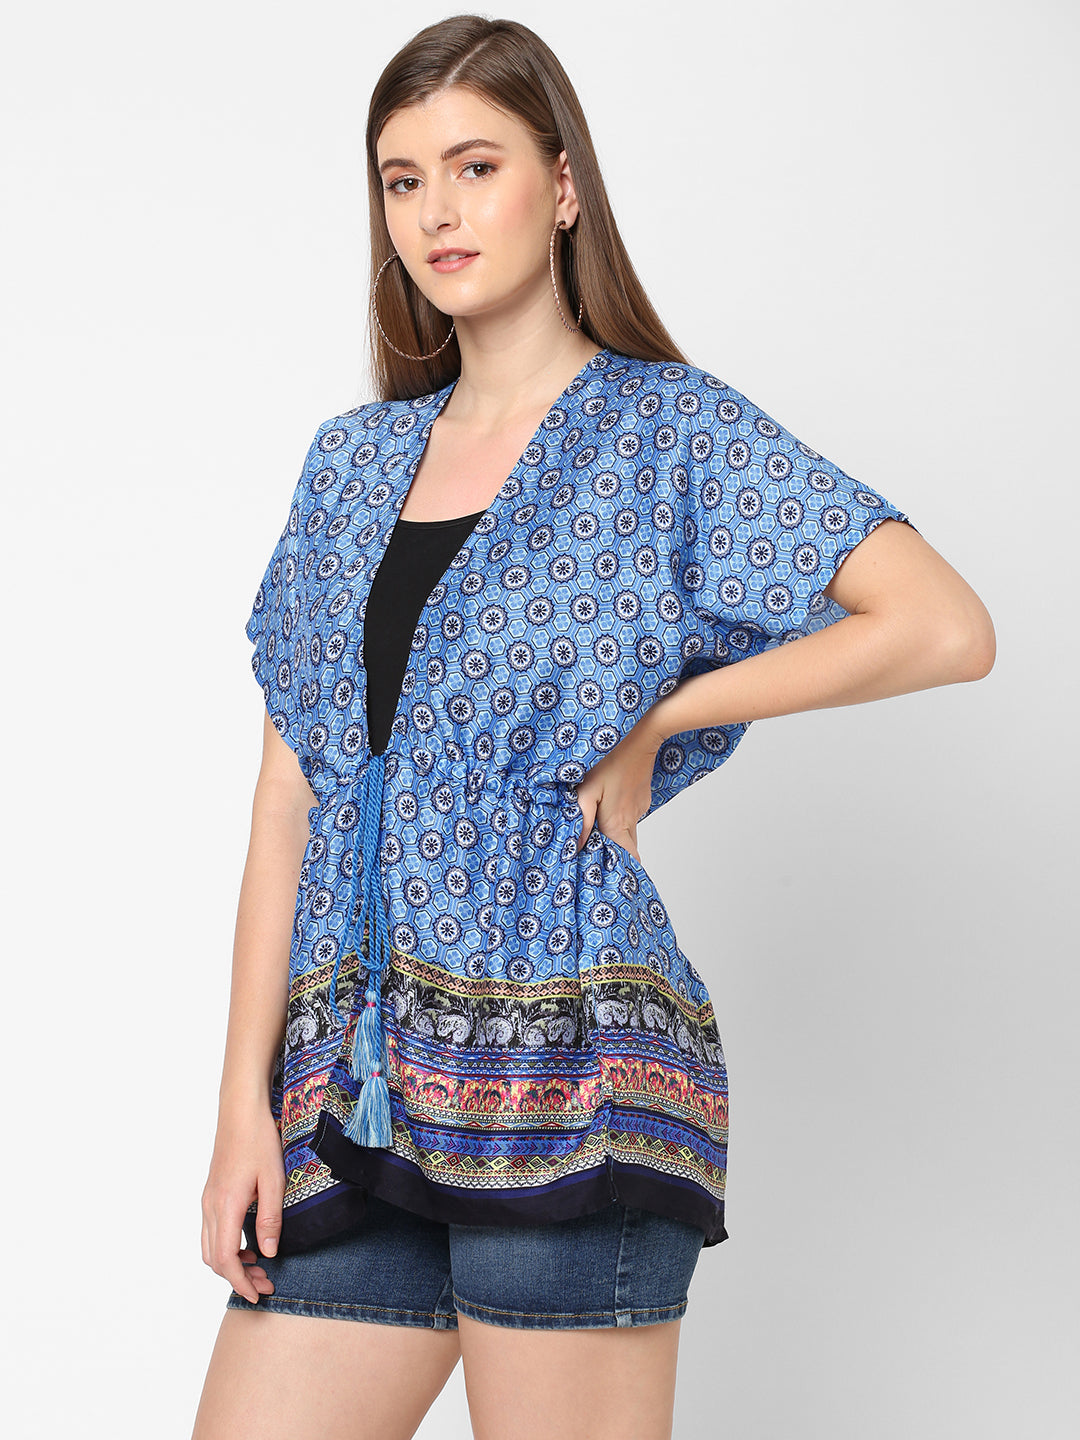 Blue Floral Printed Front Tie Top Poncho